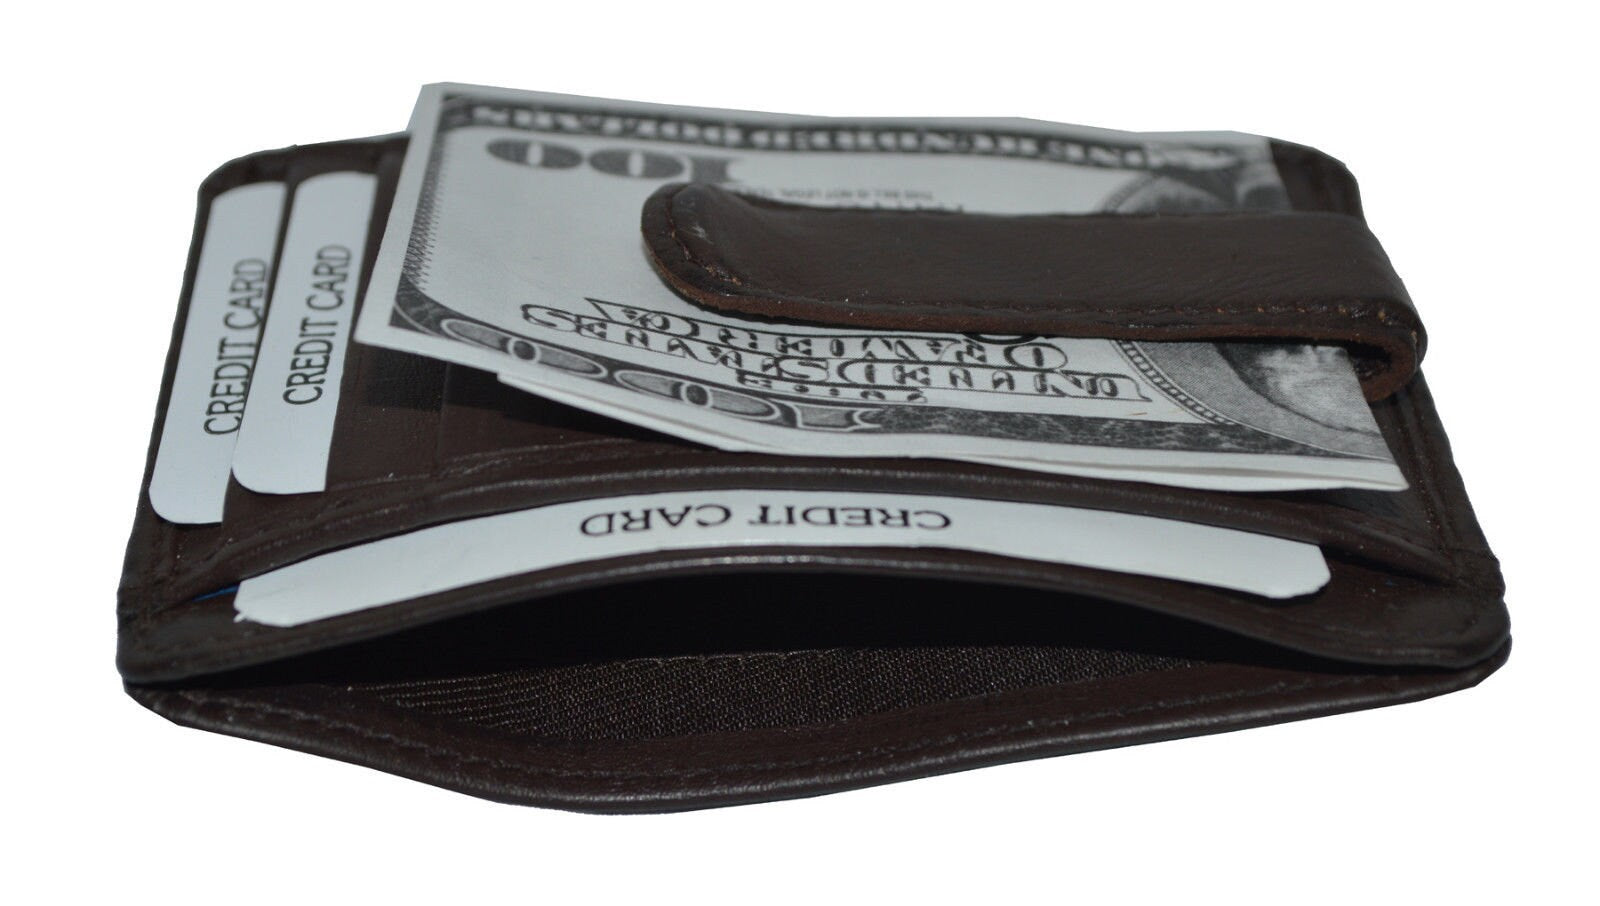 World's Thinnest Slim Money Clip Wallet with Magnet